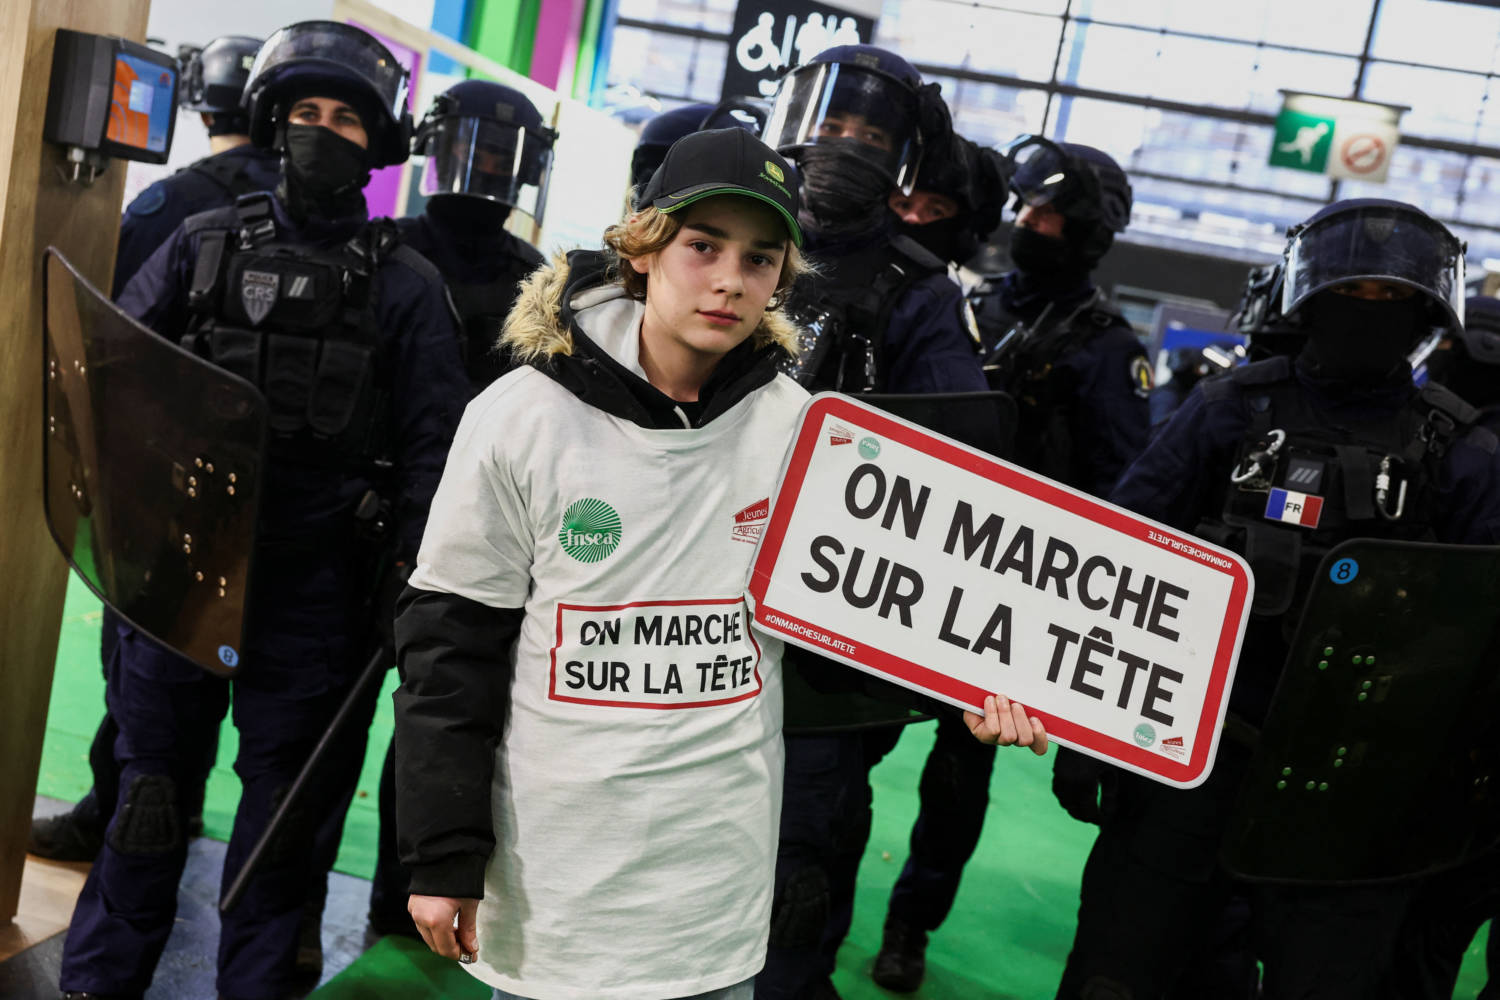 Farmers Protest During The Opening Of Paris International Agricultural Show